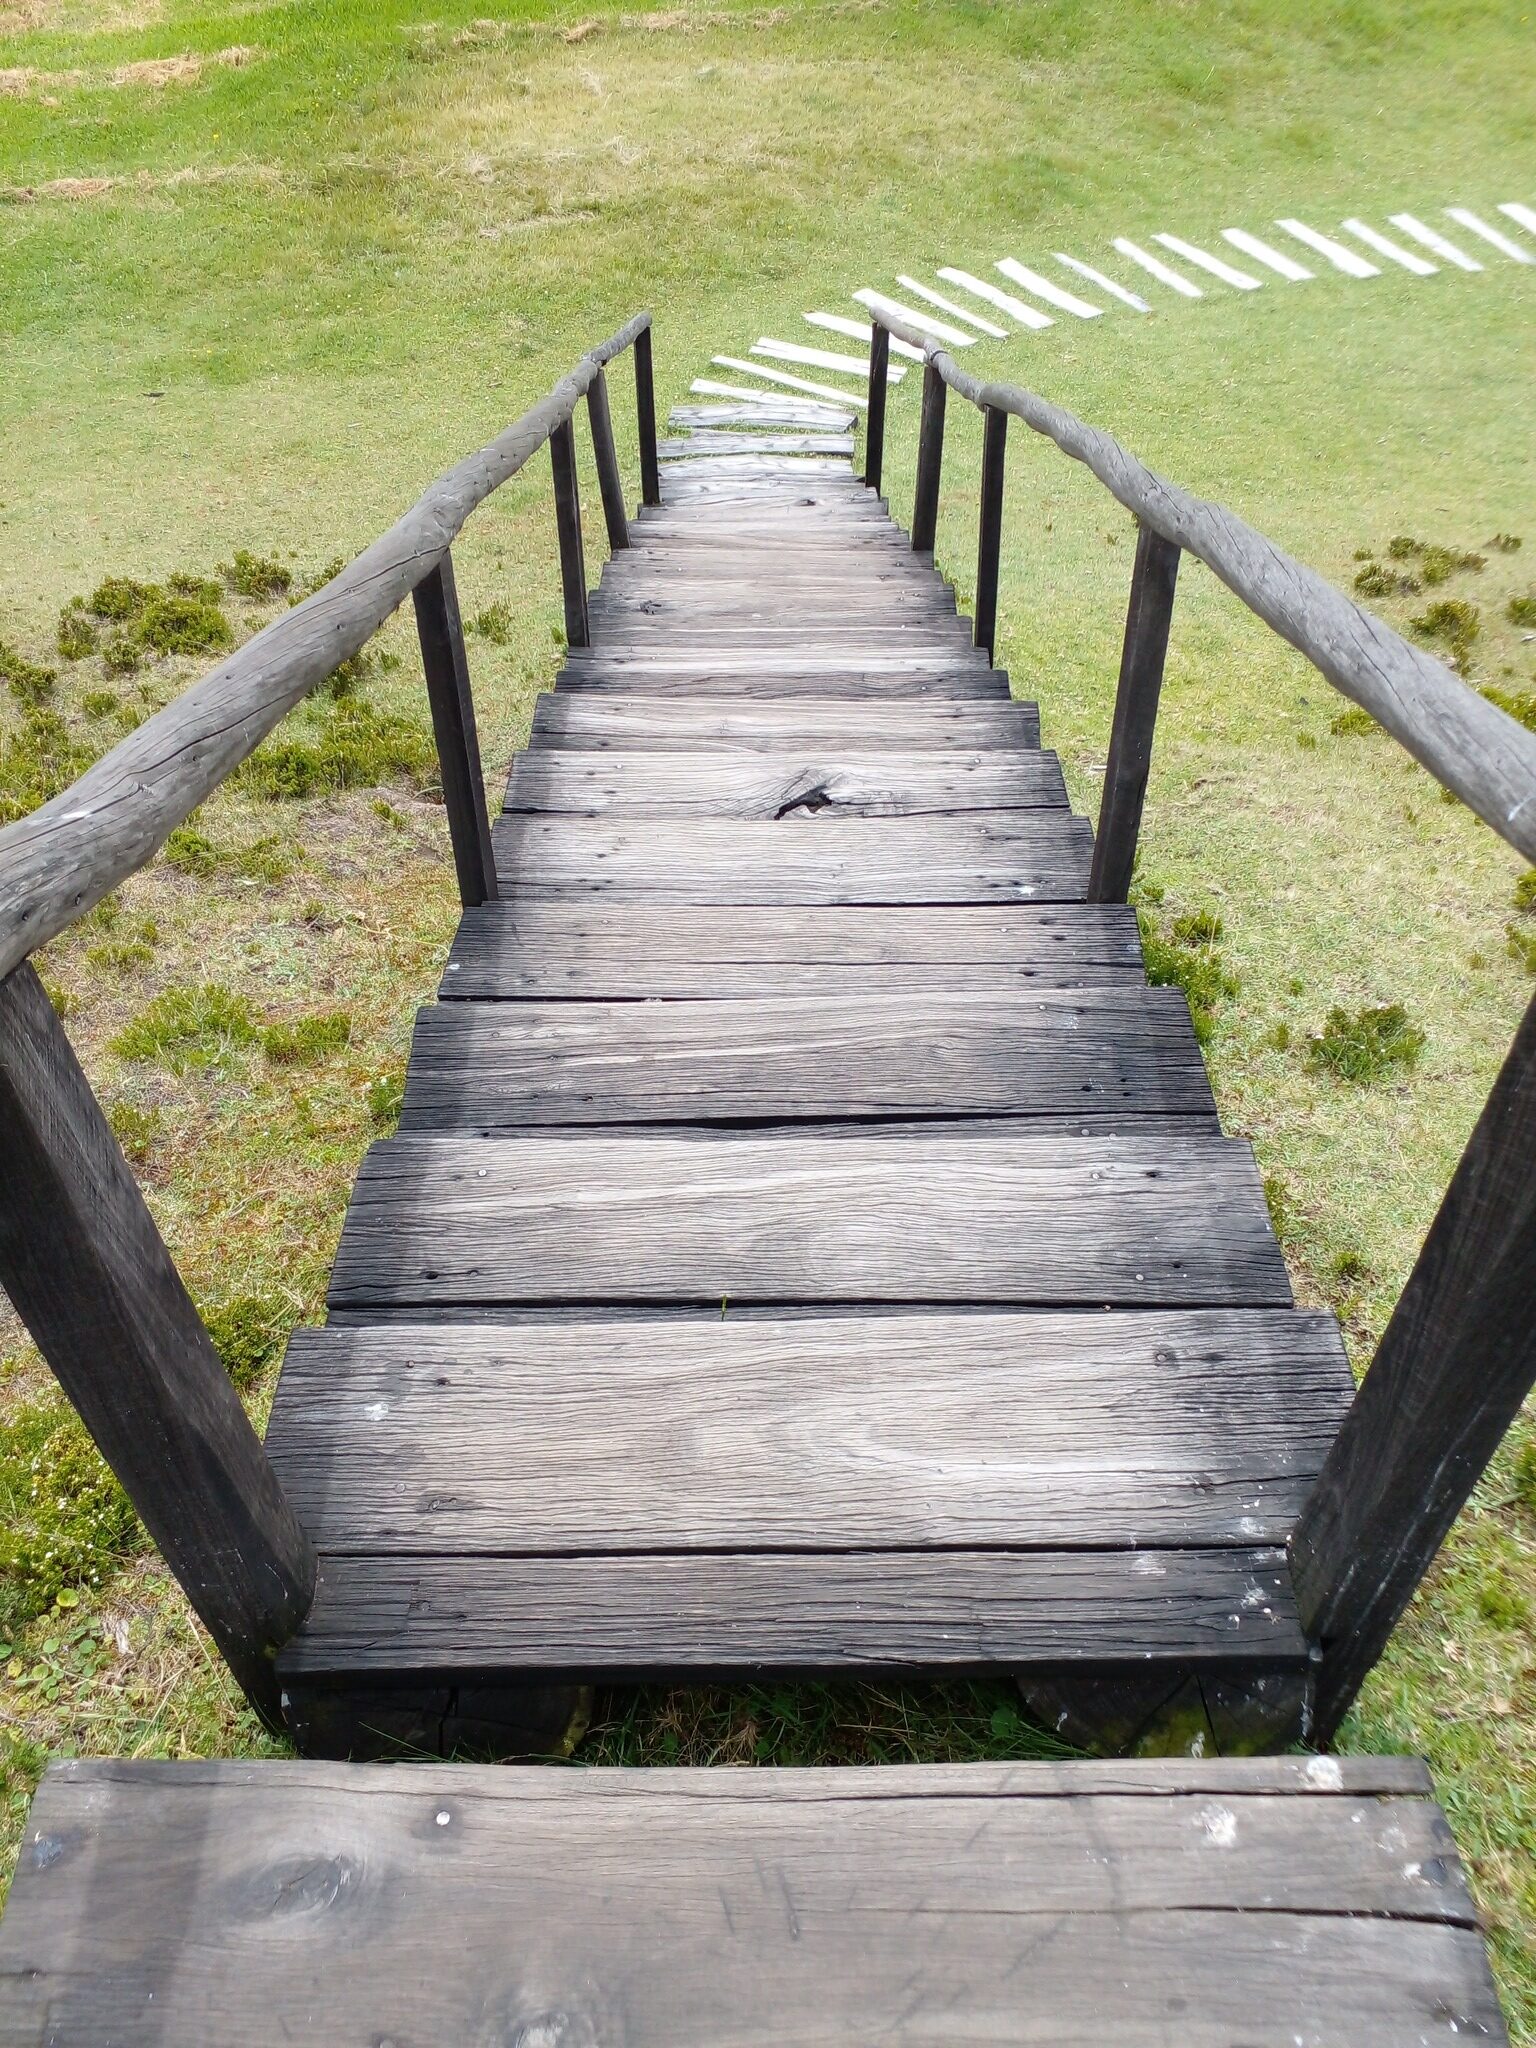 Well constructed paths & stairs lead the visitor's through the Cochasqui Park.